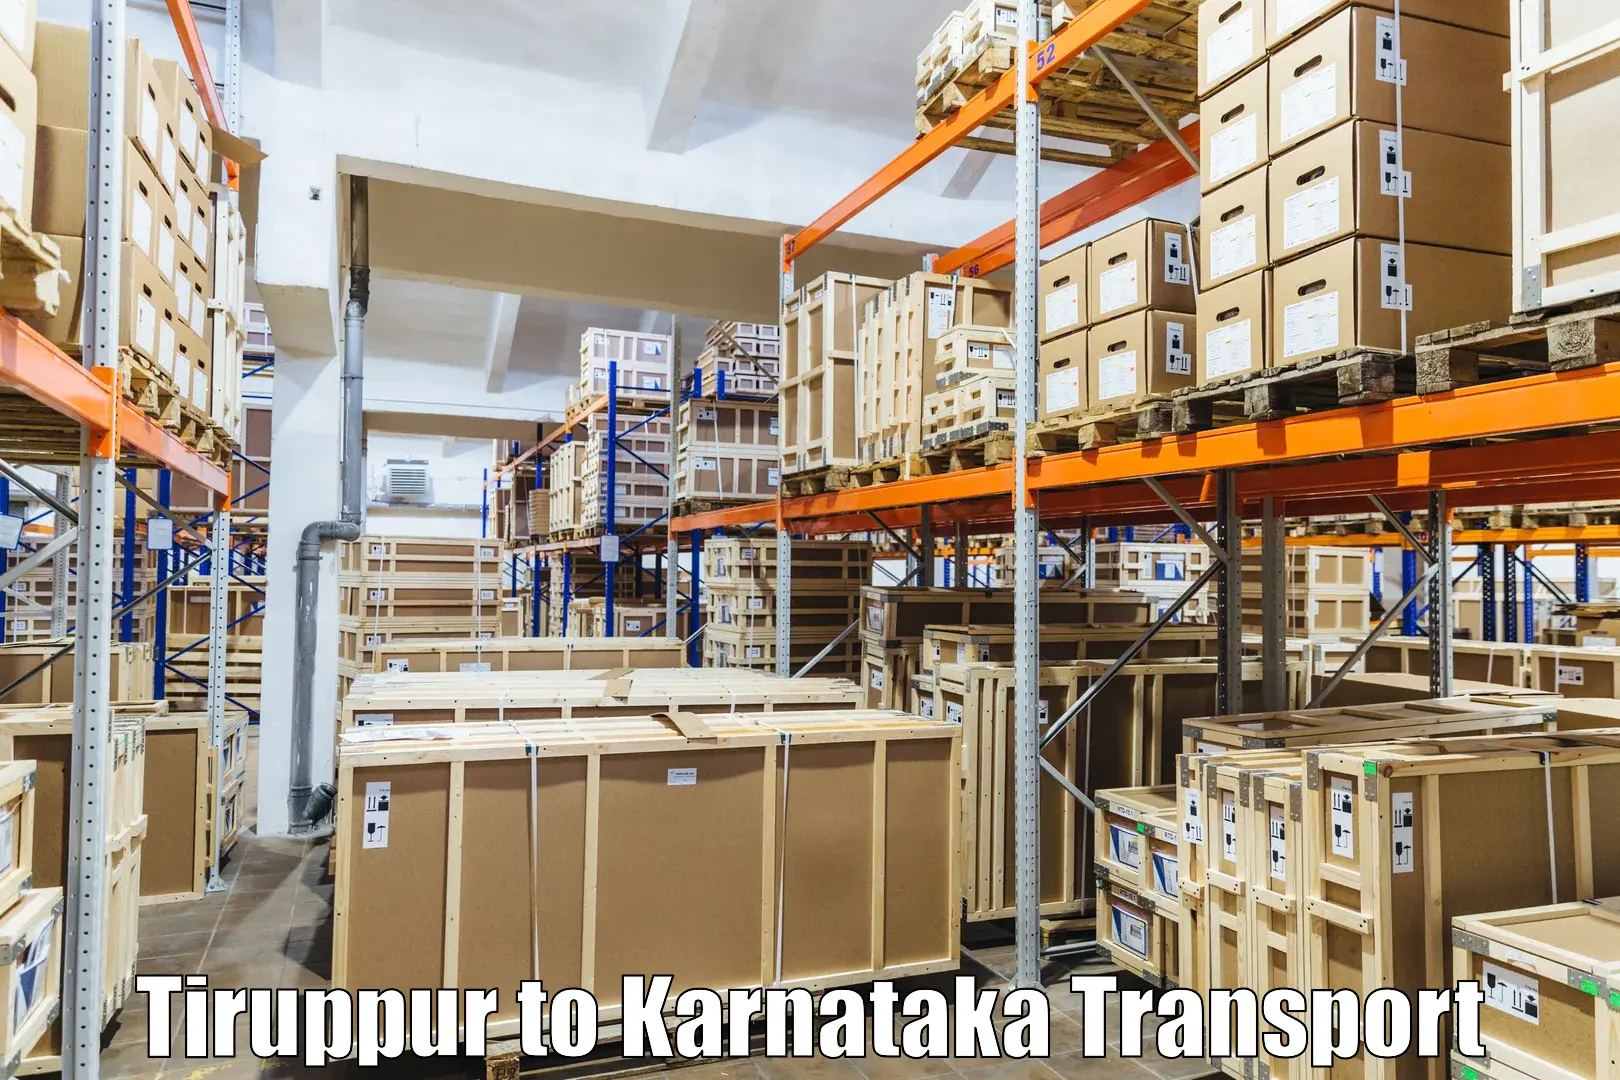 Daily parcel service transport Tiruppur to Manipal Academy of Higher Education